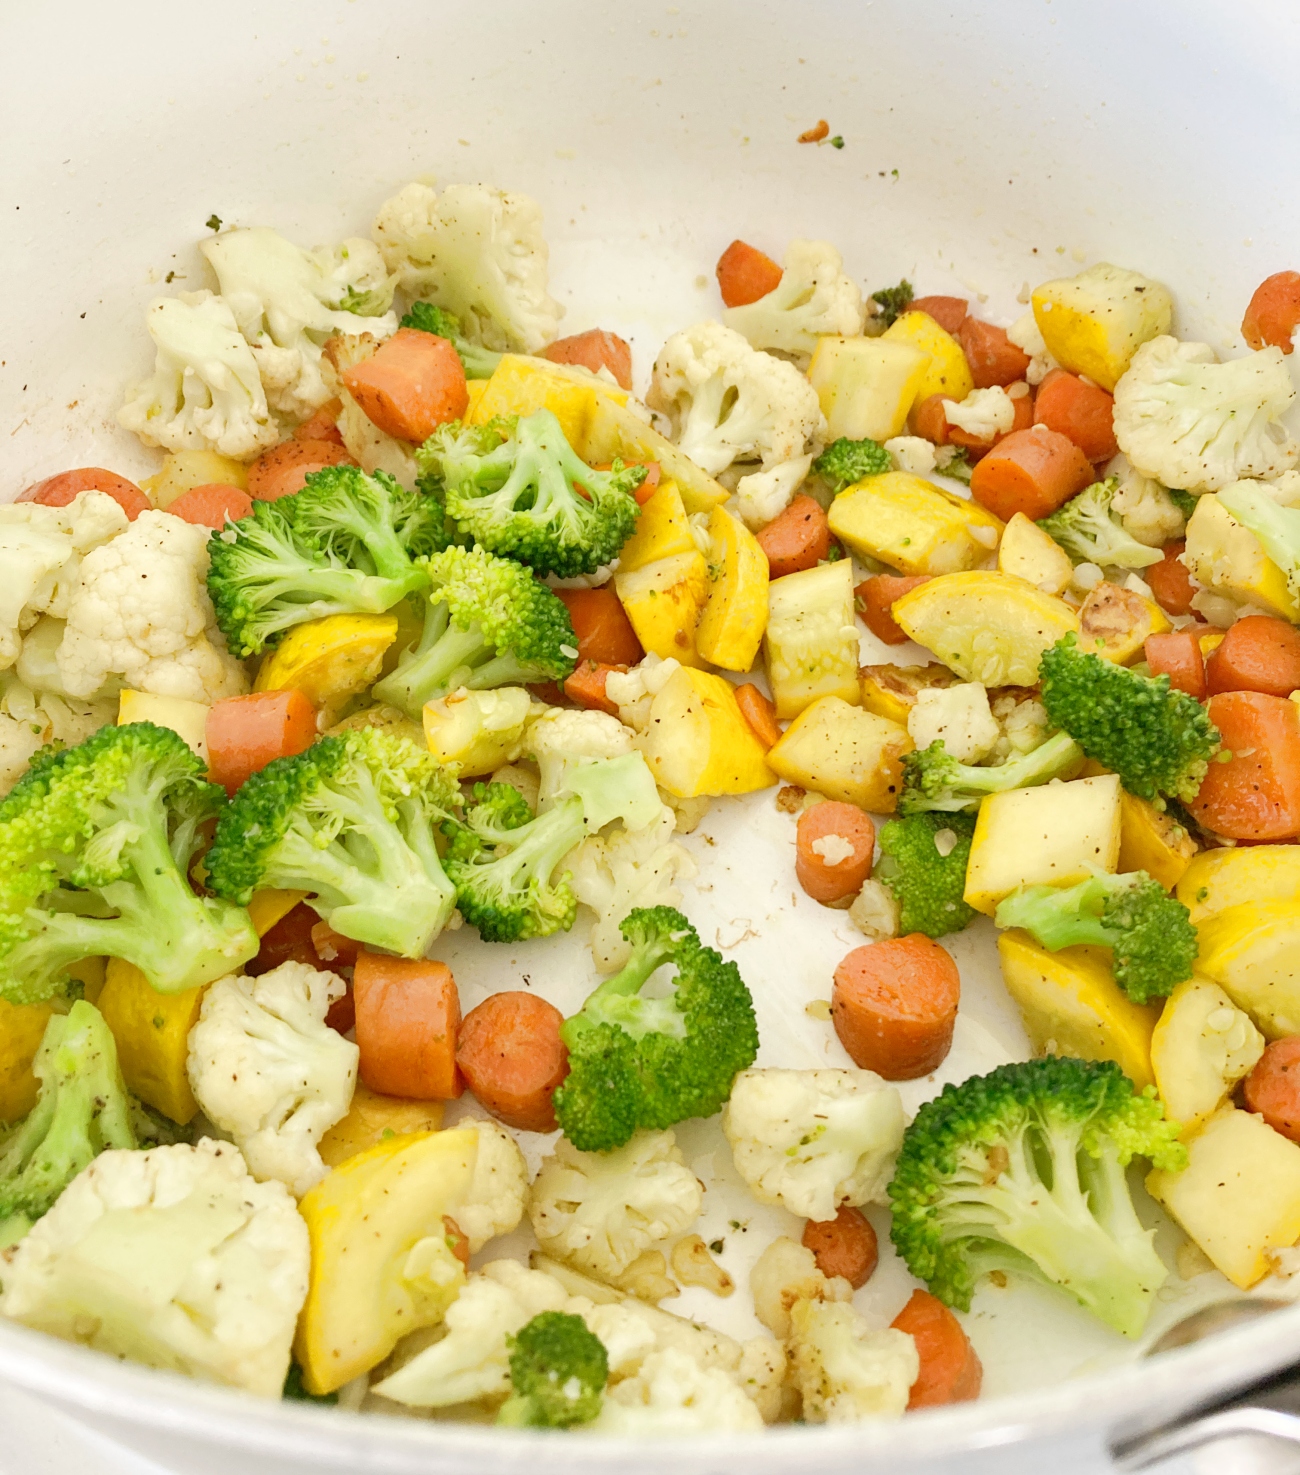 Heat 1 tablespoon olive oil in stockpot on medium heat. Add carrots, cauliflower, and broccoli, squash to pan. Cook for 5-7 minutes or until softened. Stir in salt and pepper and remove from pan for later. Wipe out hot pan with paper towel and some tongs.